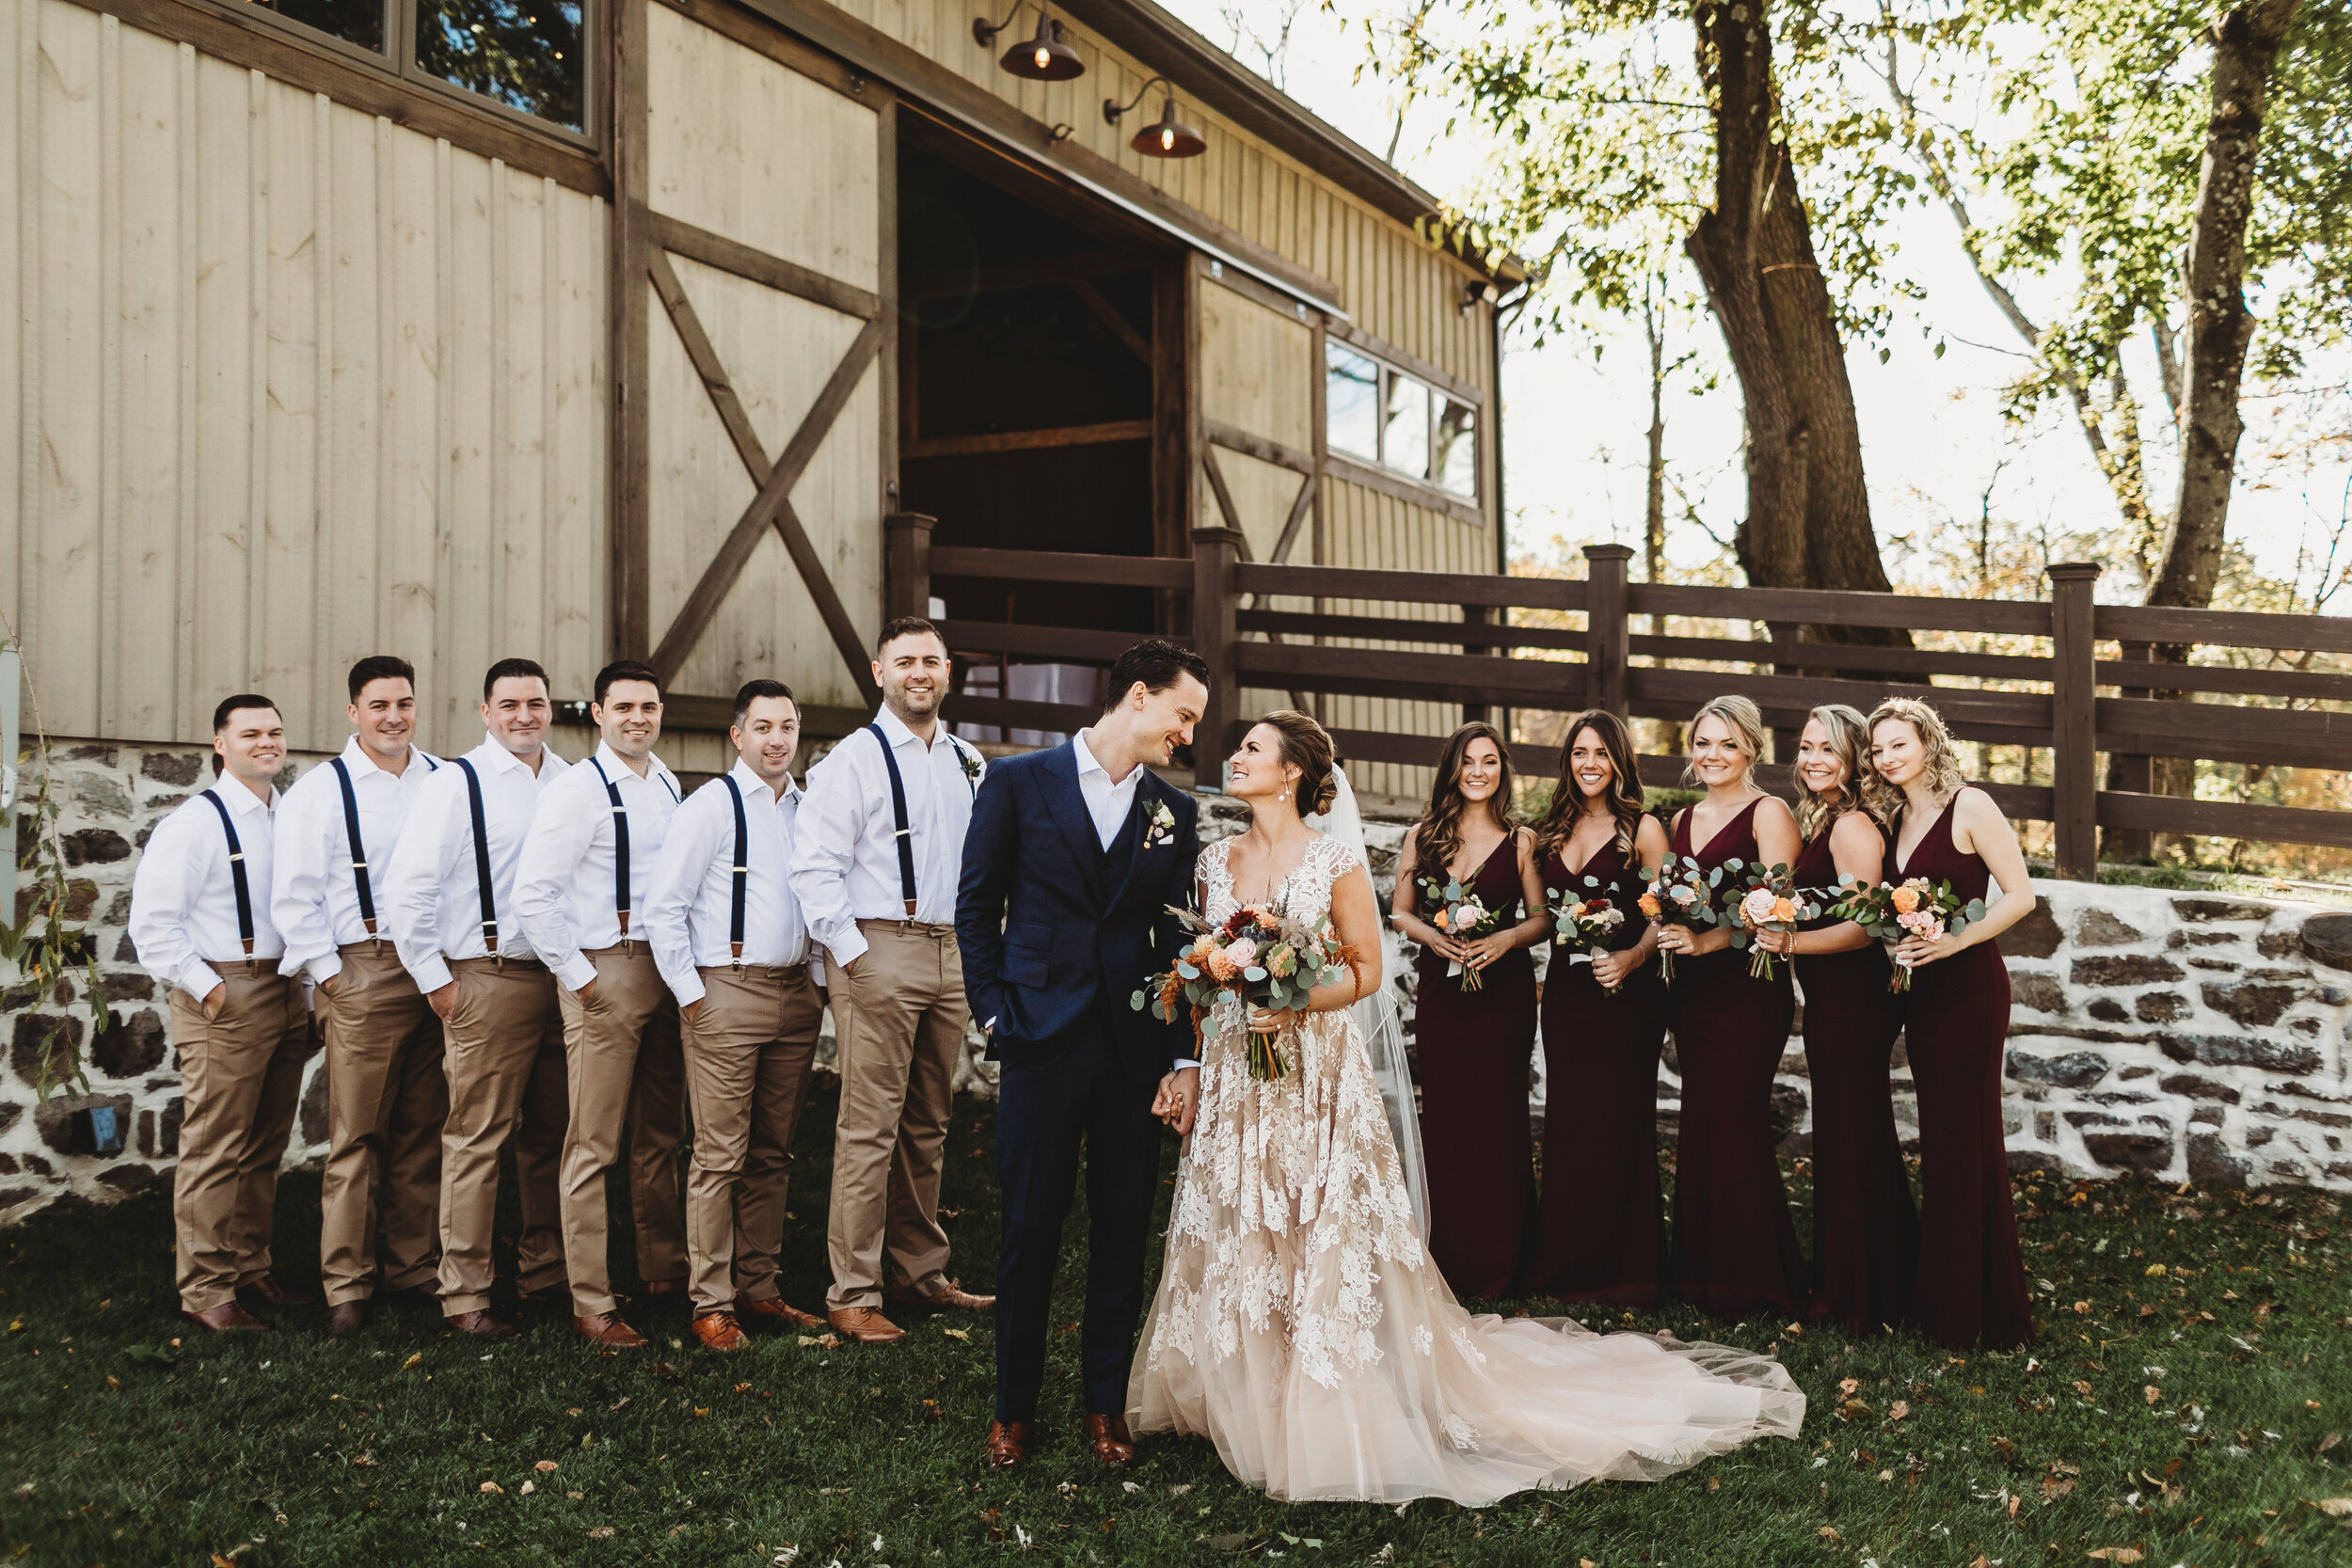 Abby Jenkins Photography at the Farm Bakery and Events